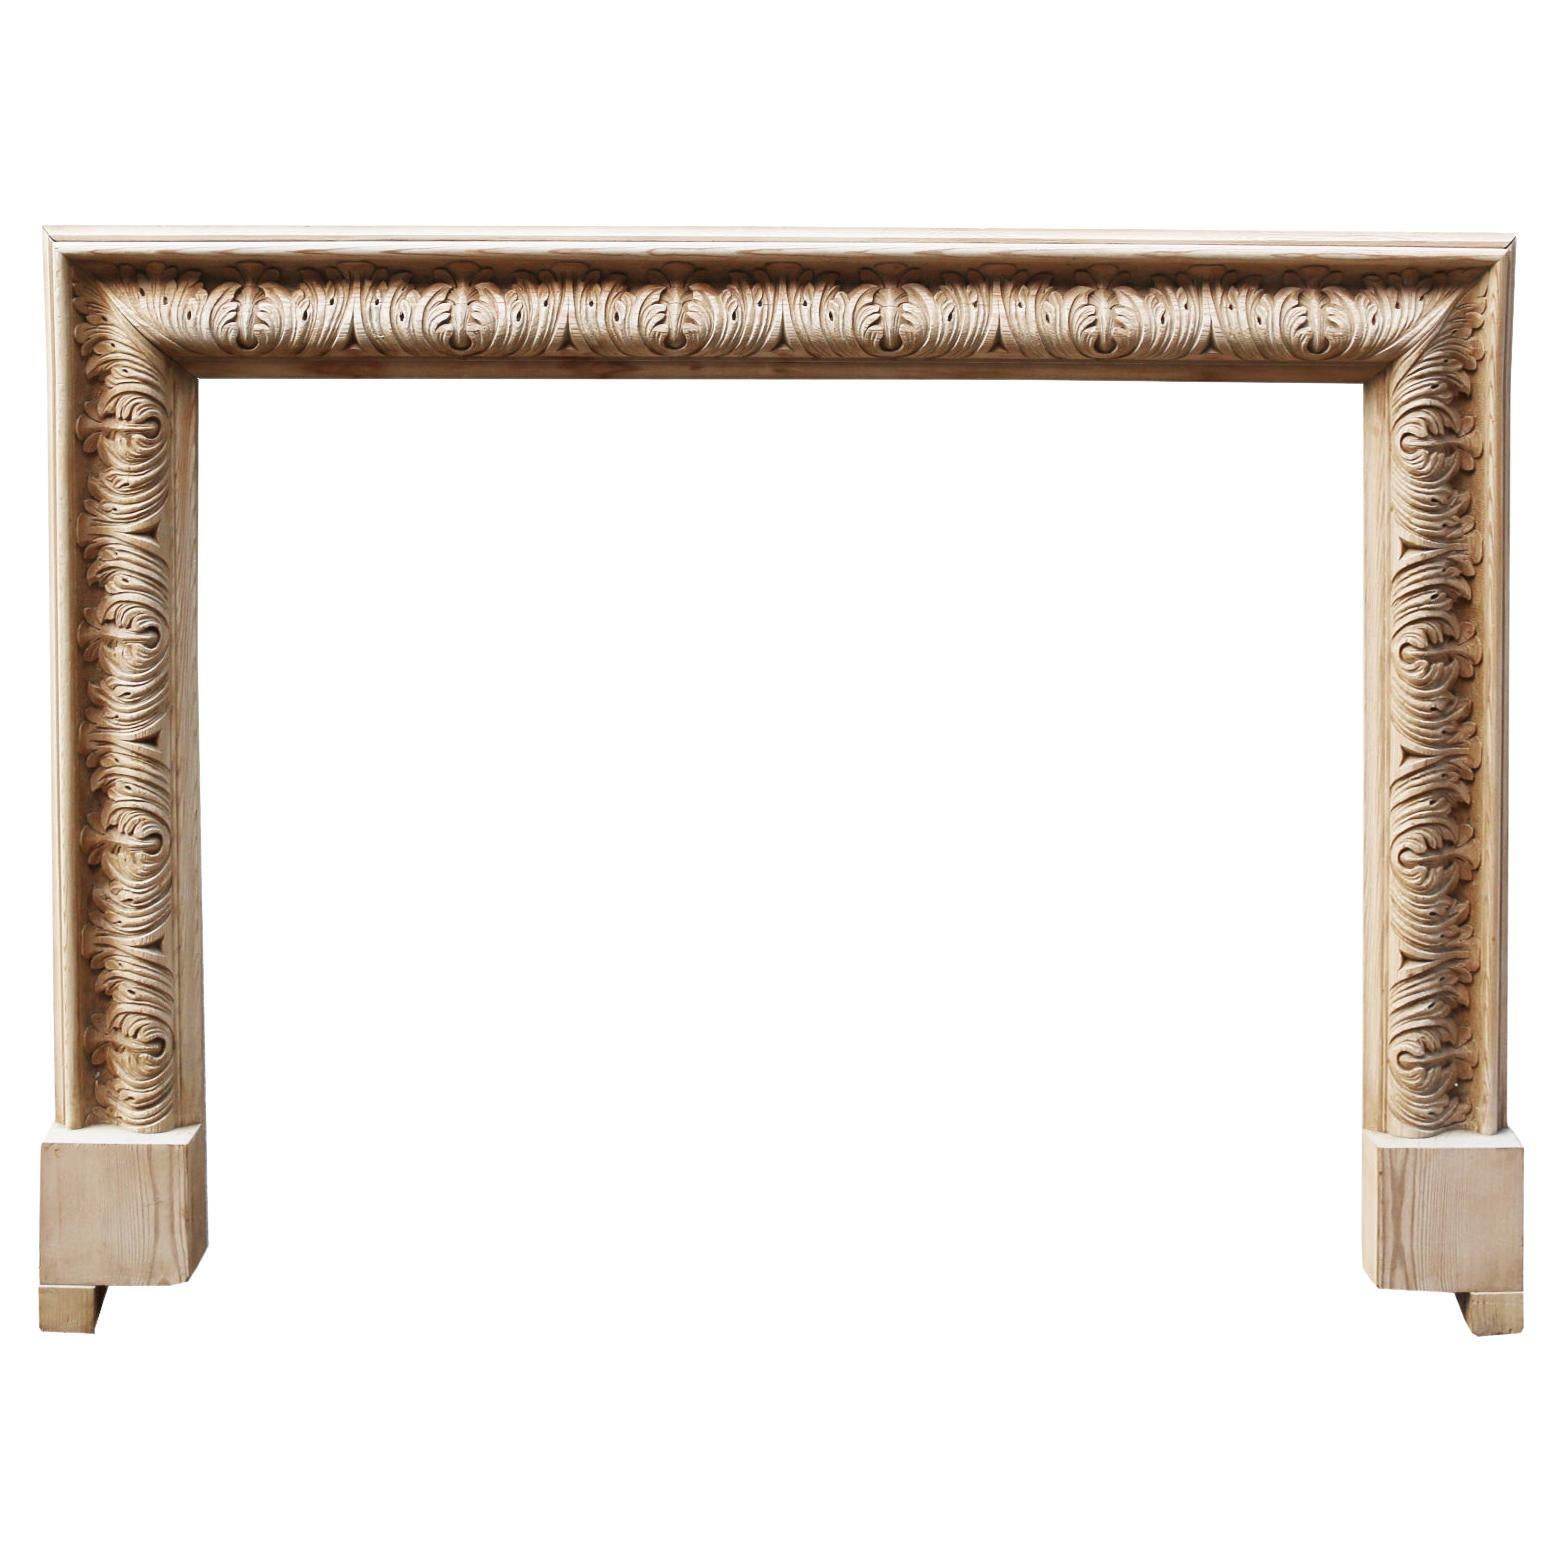 Reclaimed Bolection Style Fireplace Surround For Sale